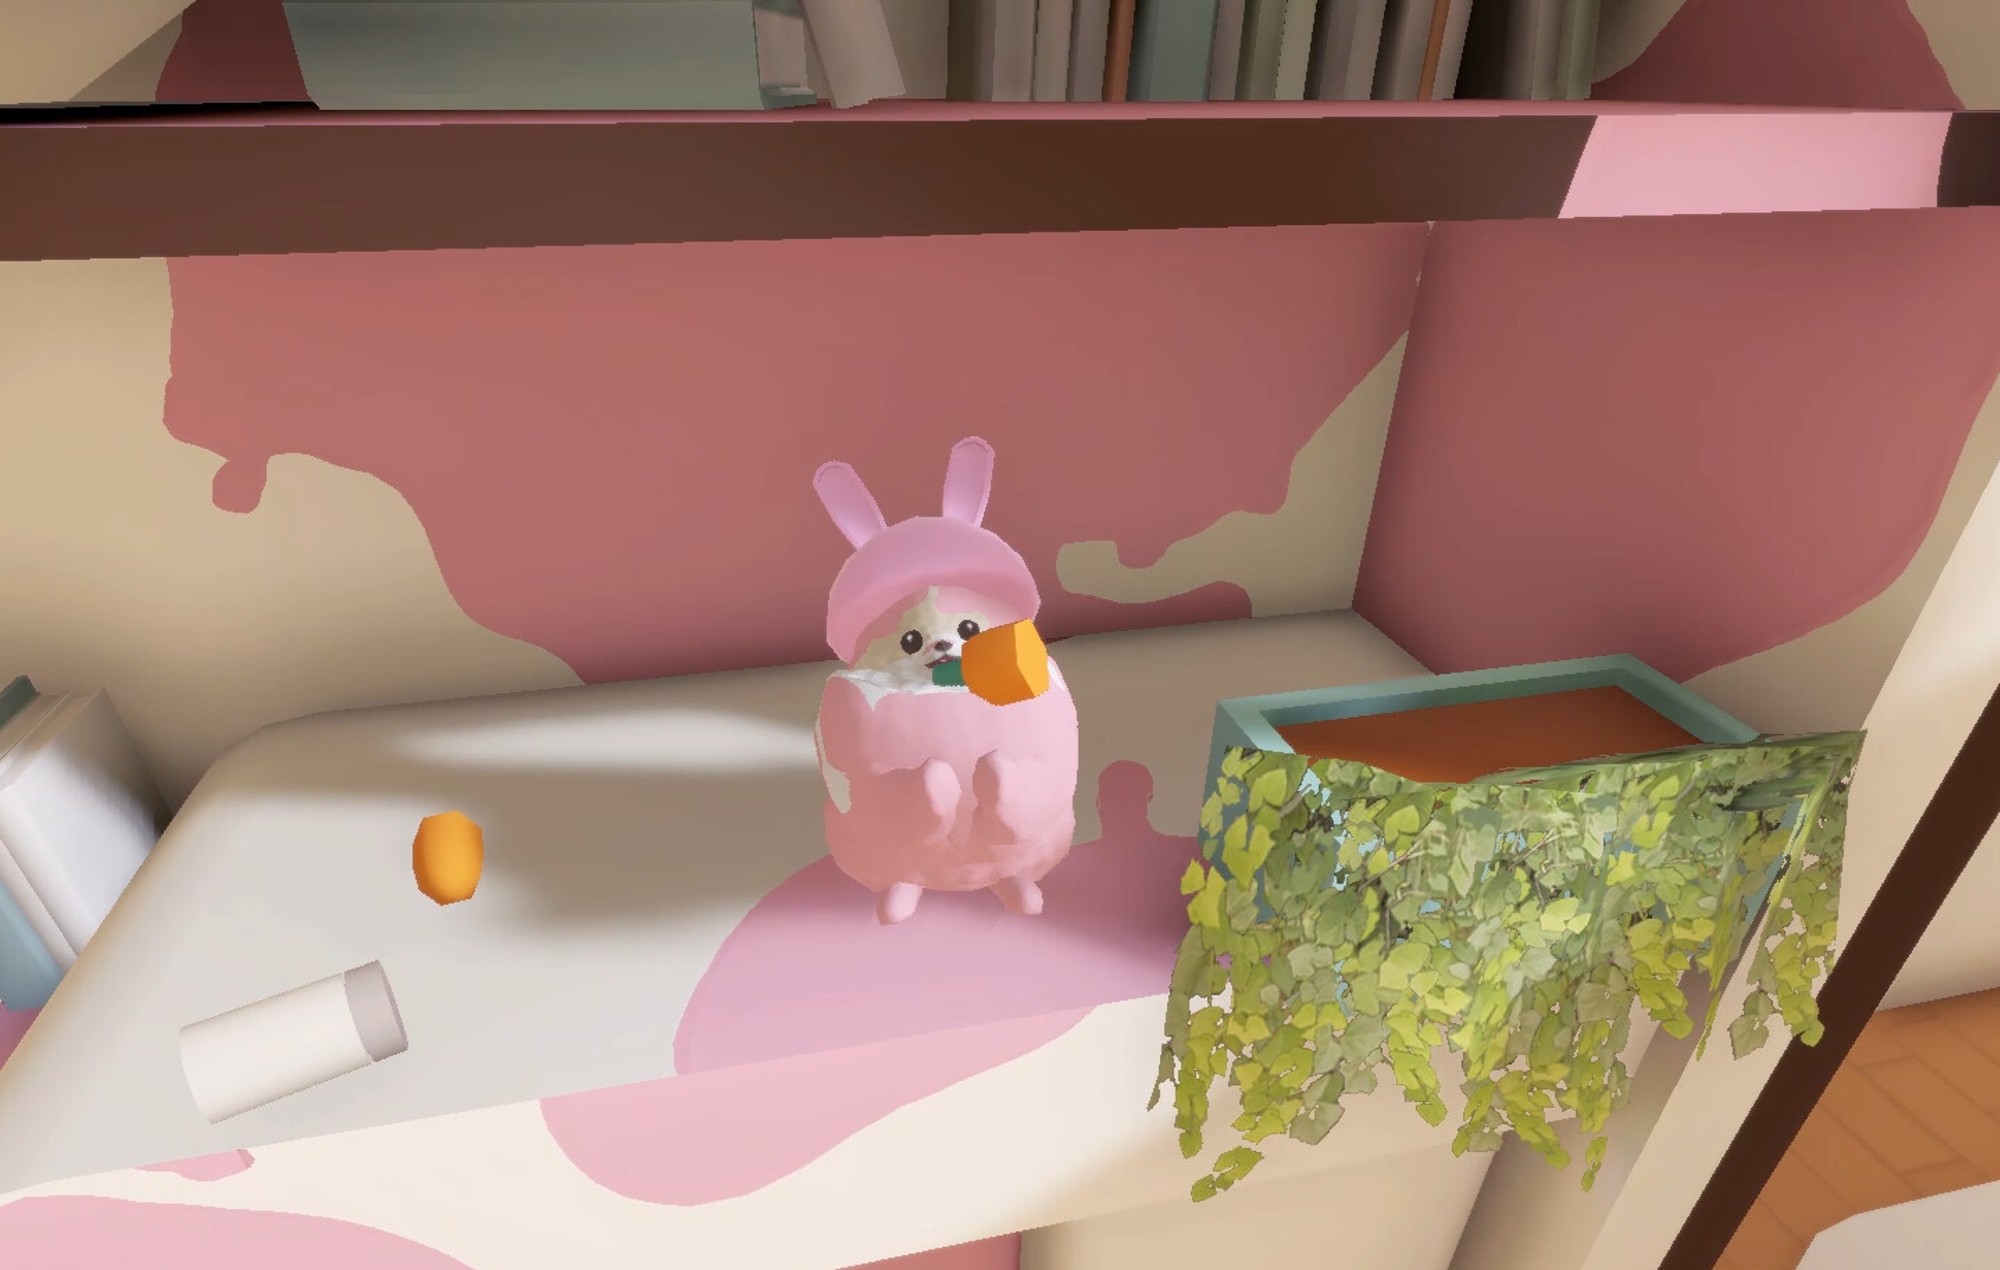 The internet has fallen in love with an adorable Pomeranian puppy game from Bandai Namco